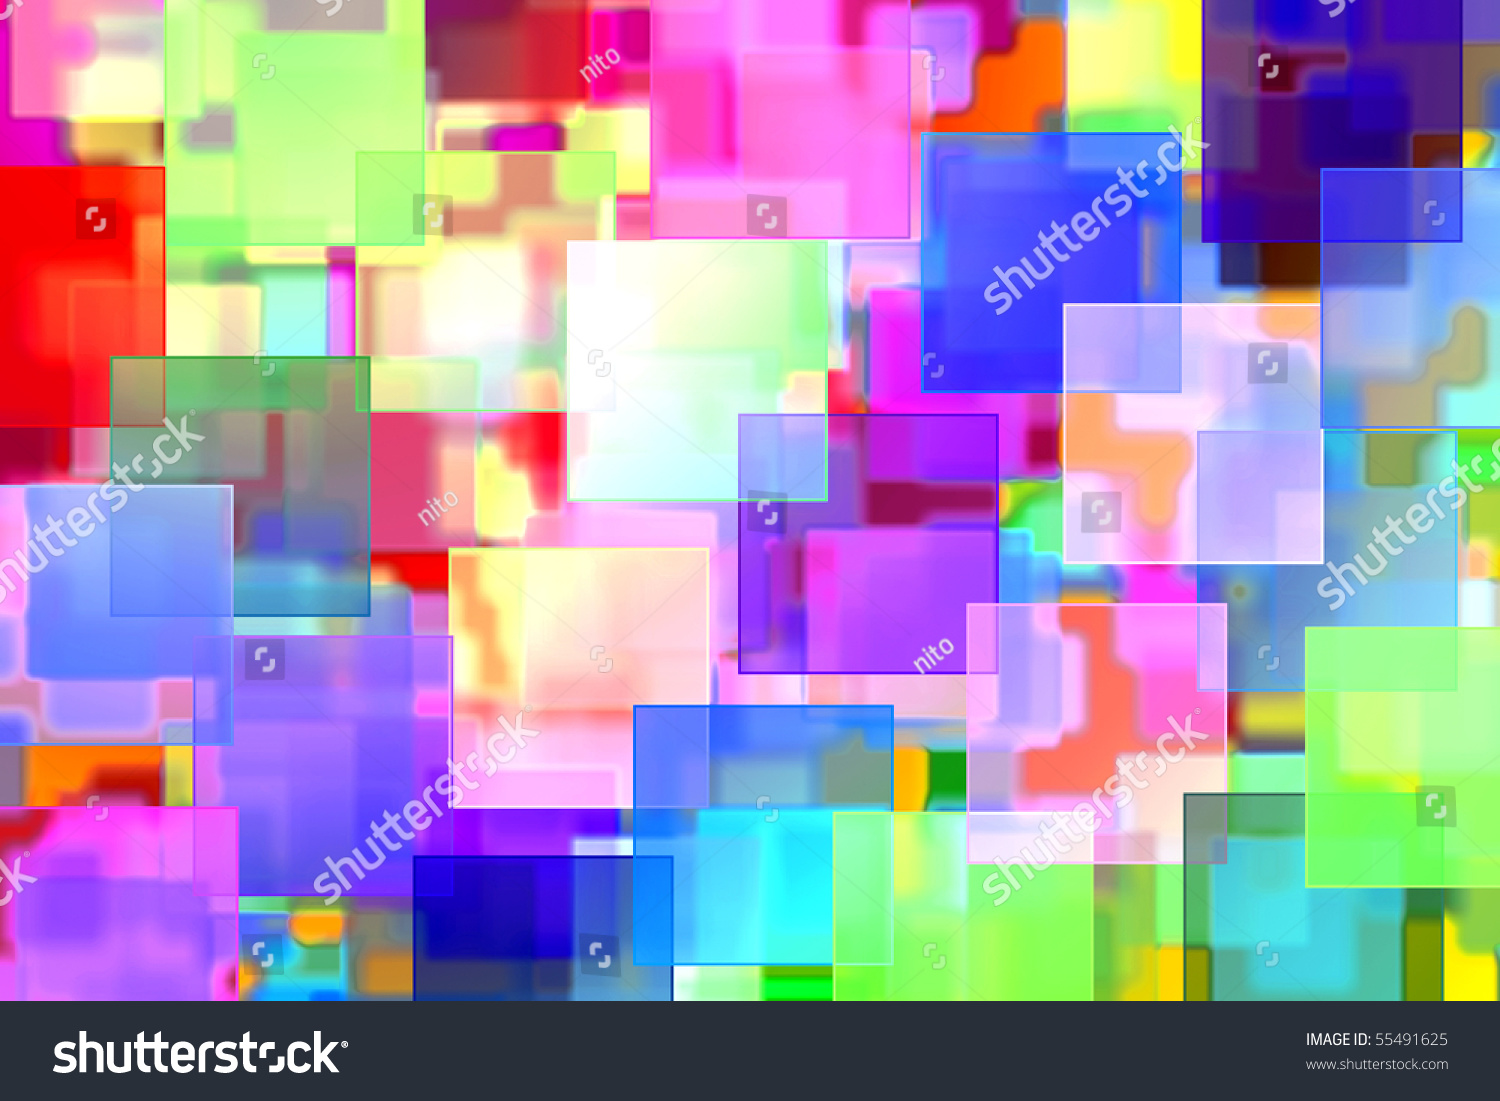 Background Of Many Squares Of Different Colors And Sizes Stock Photo ...